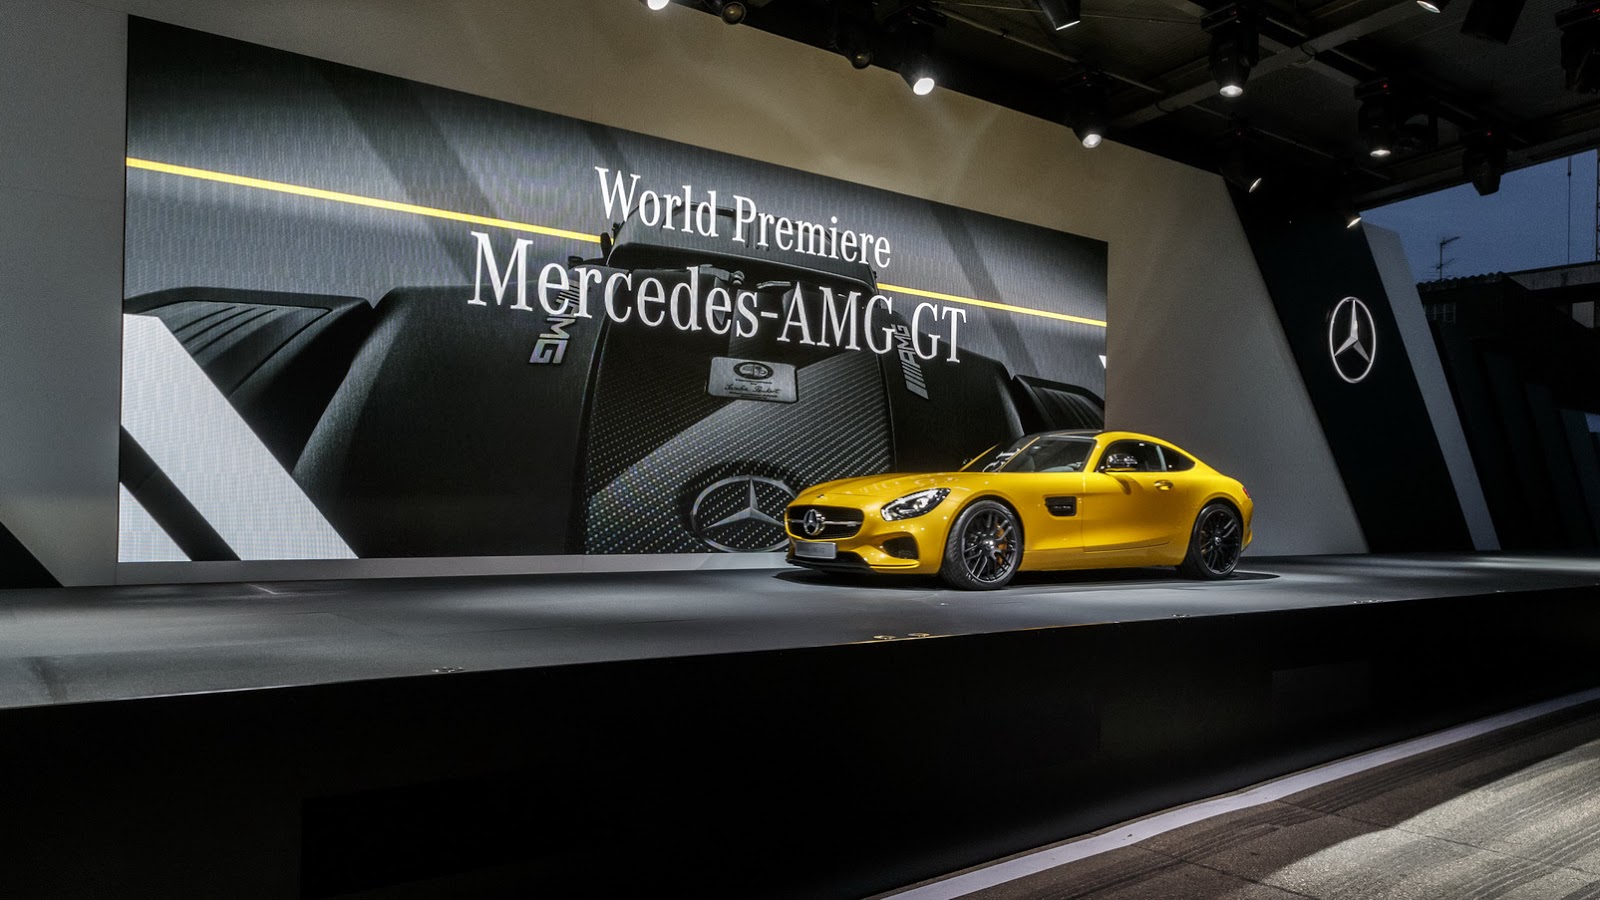 Mercedes-AMG-GT-Carscoops1